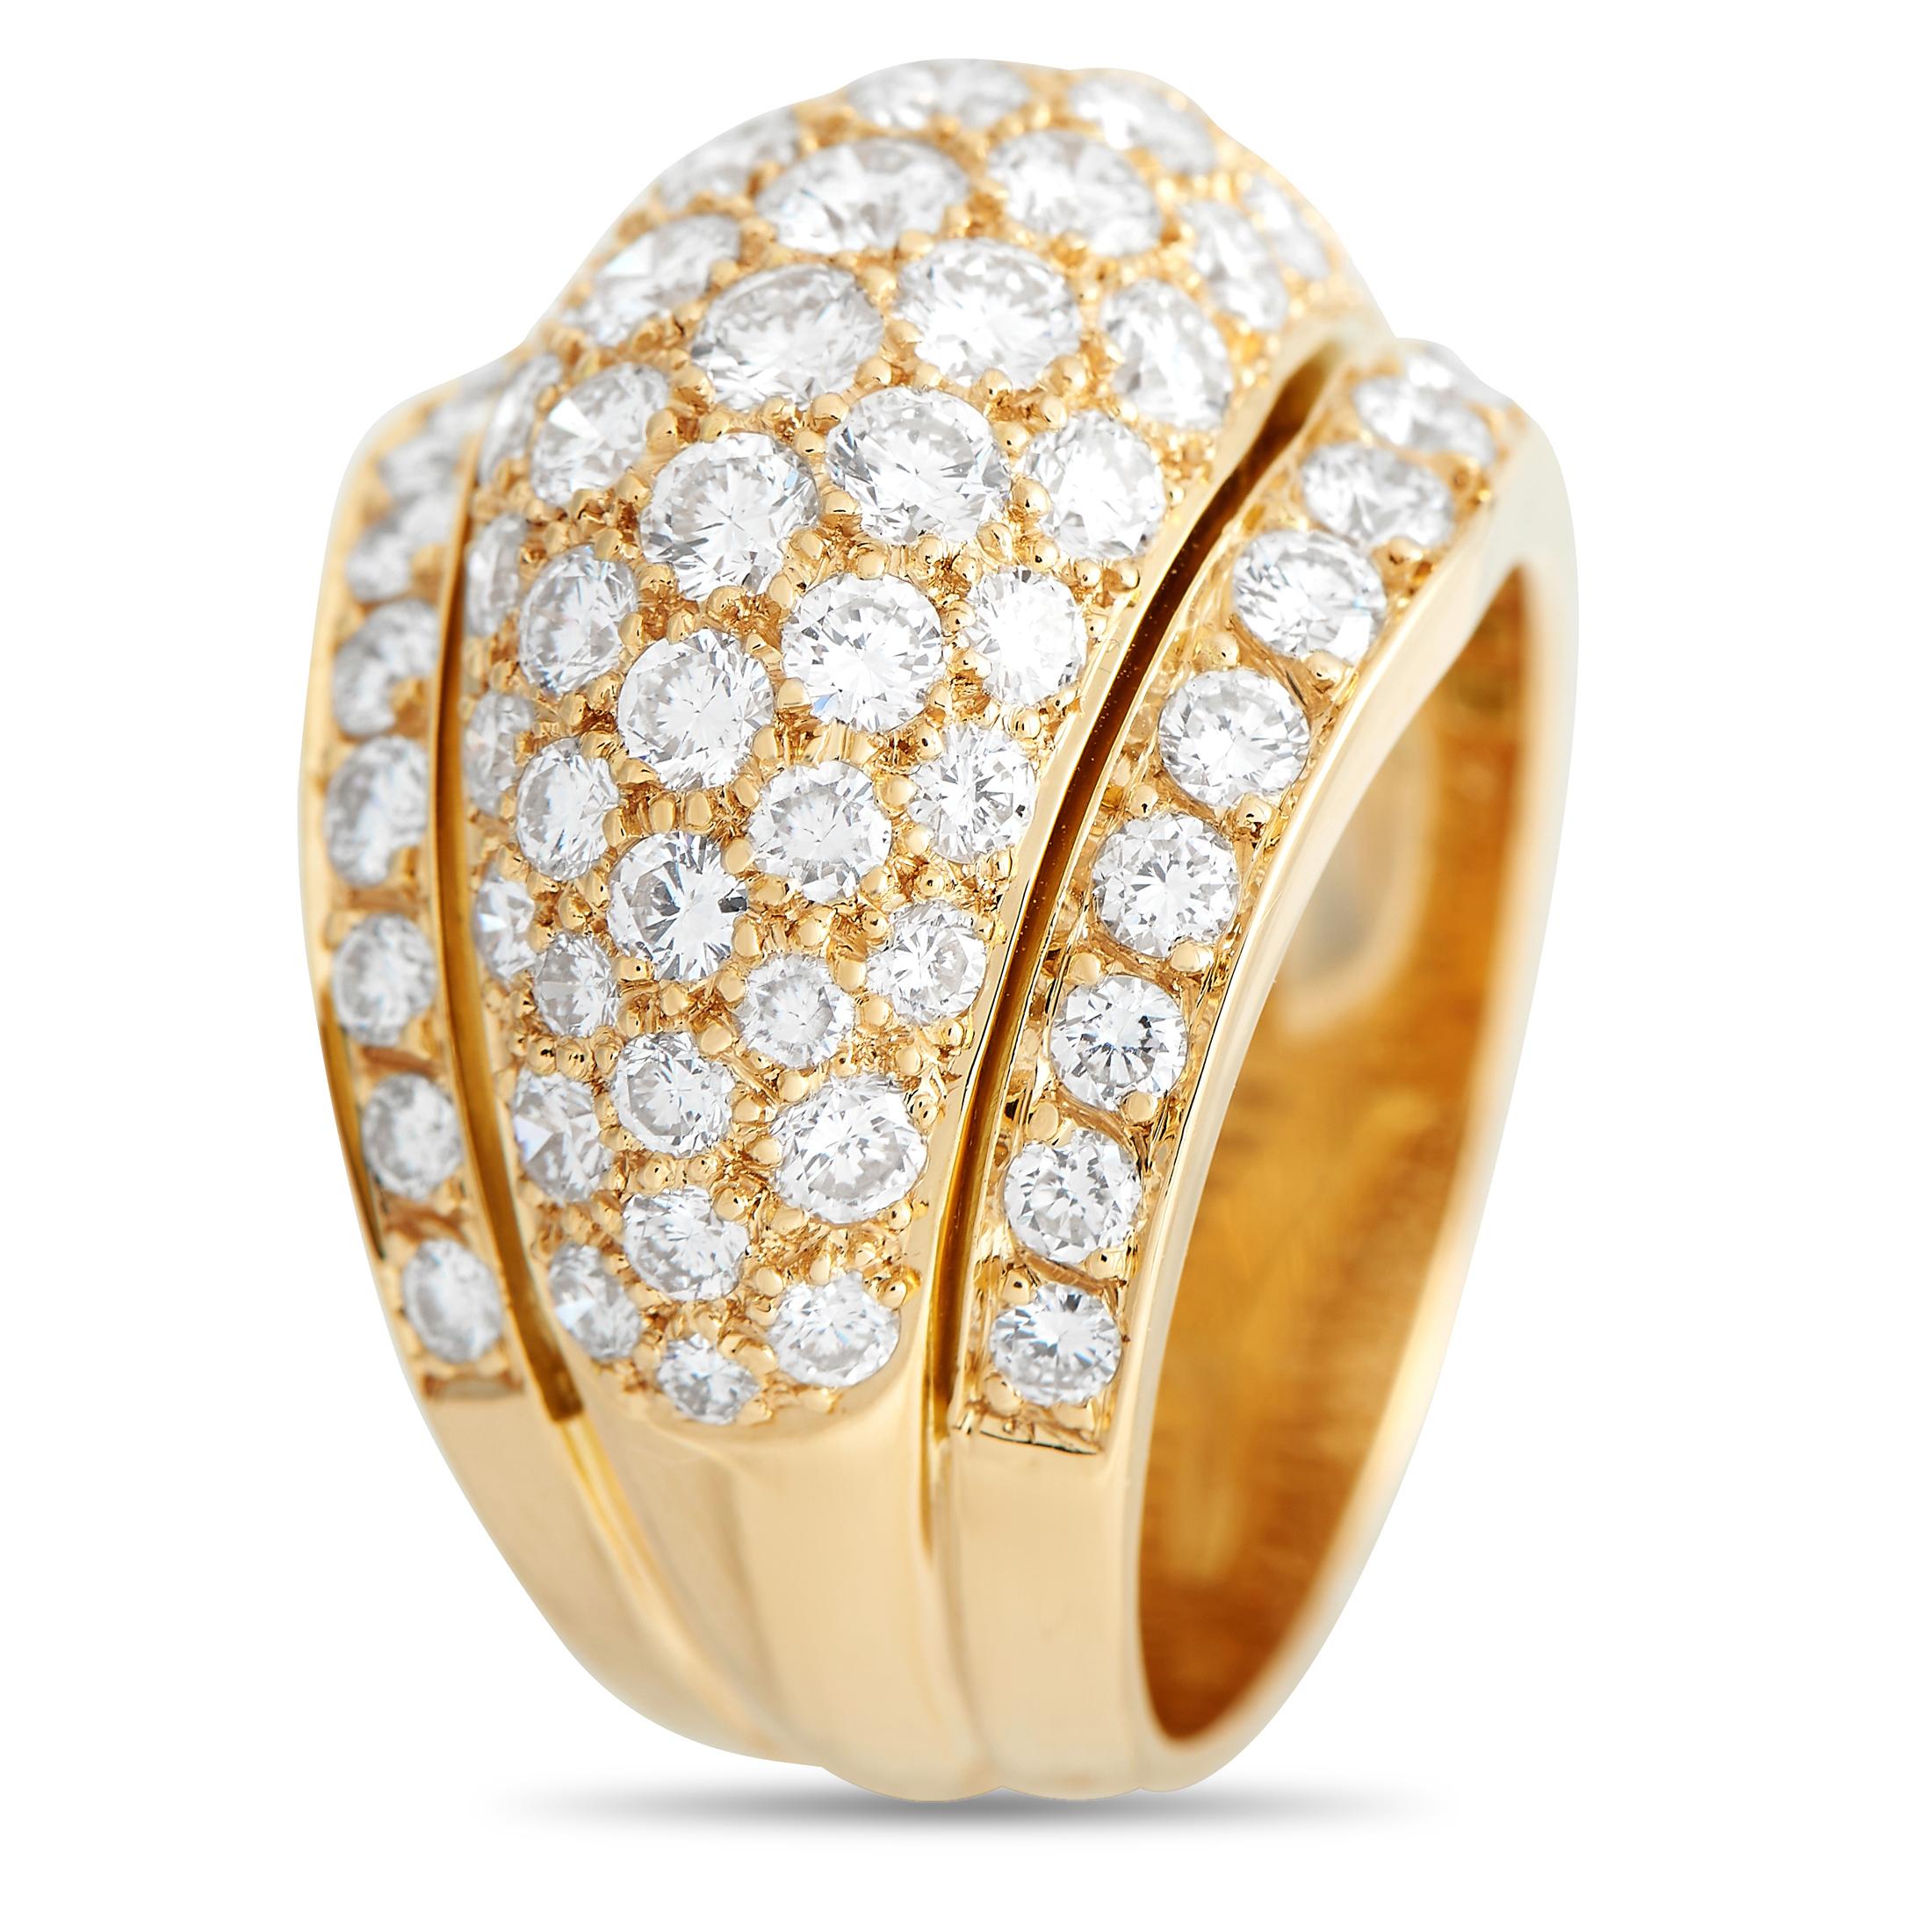 Here is an extremely appealing statement ring in luxurious yellow gold, shaped like a bomb but dressed with glitter. The 8mm thick tiered band has a wide, curving top covered with pavé-set diamonds. This ring with an impressive finger presence has